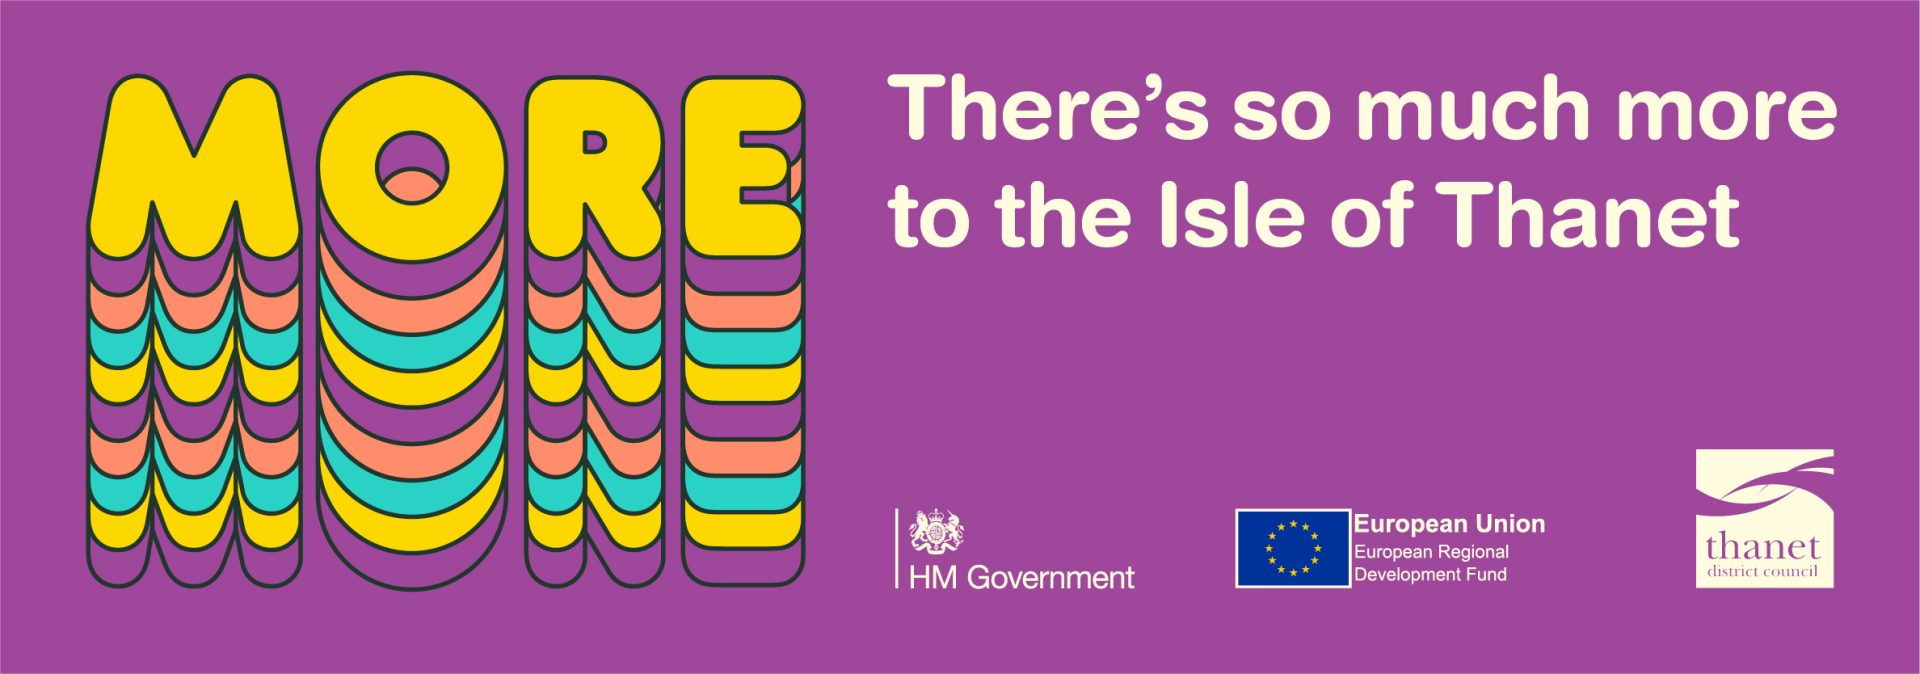 There's so much more to the Isle of Thanet campaign banner